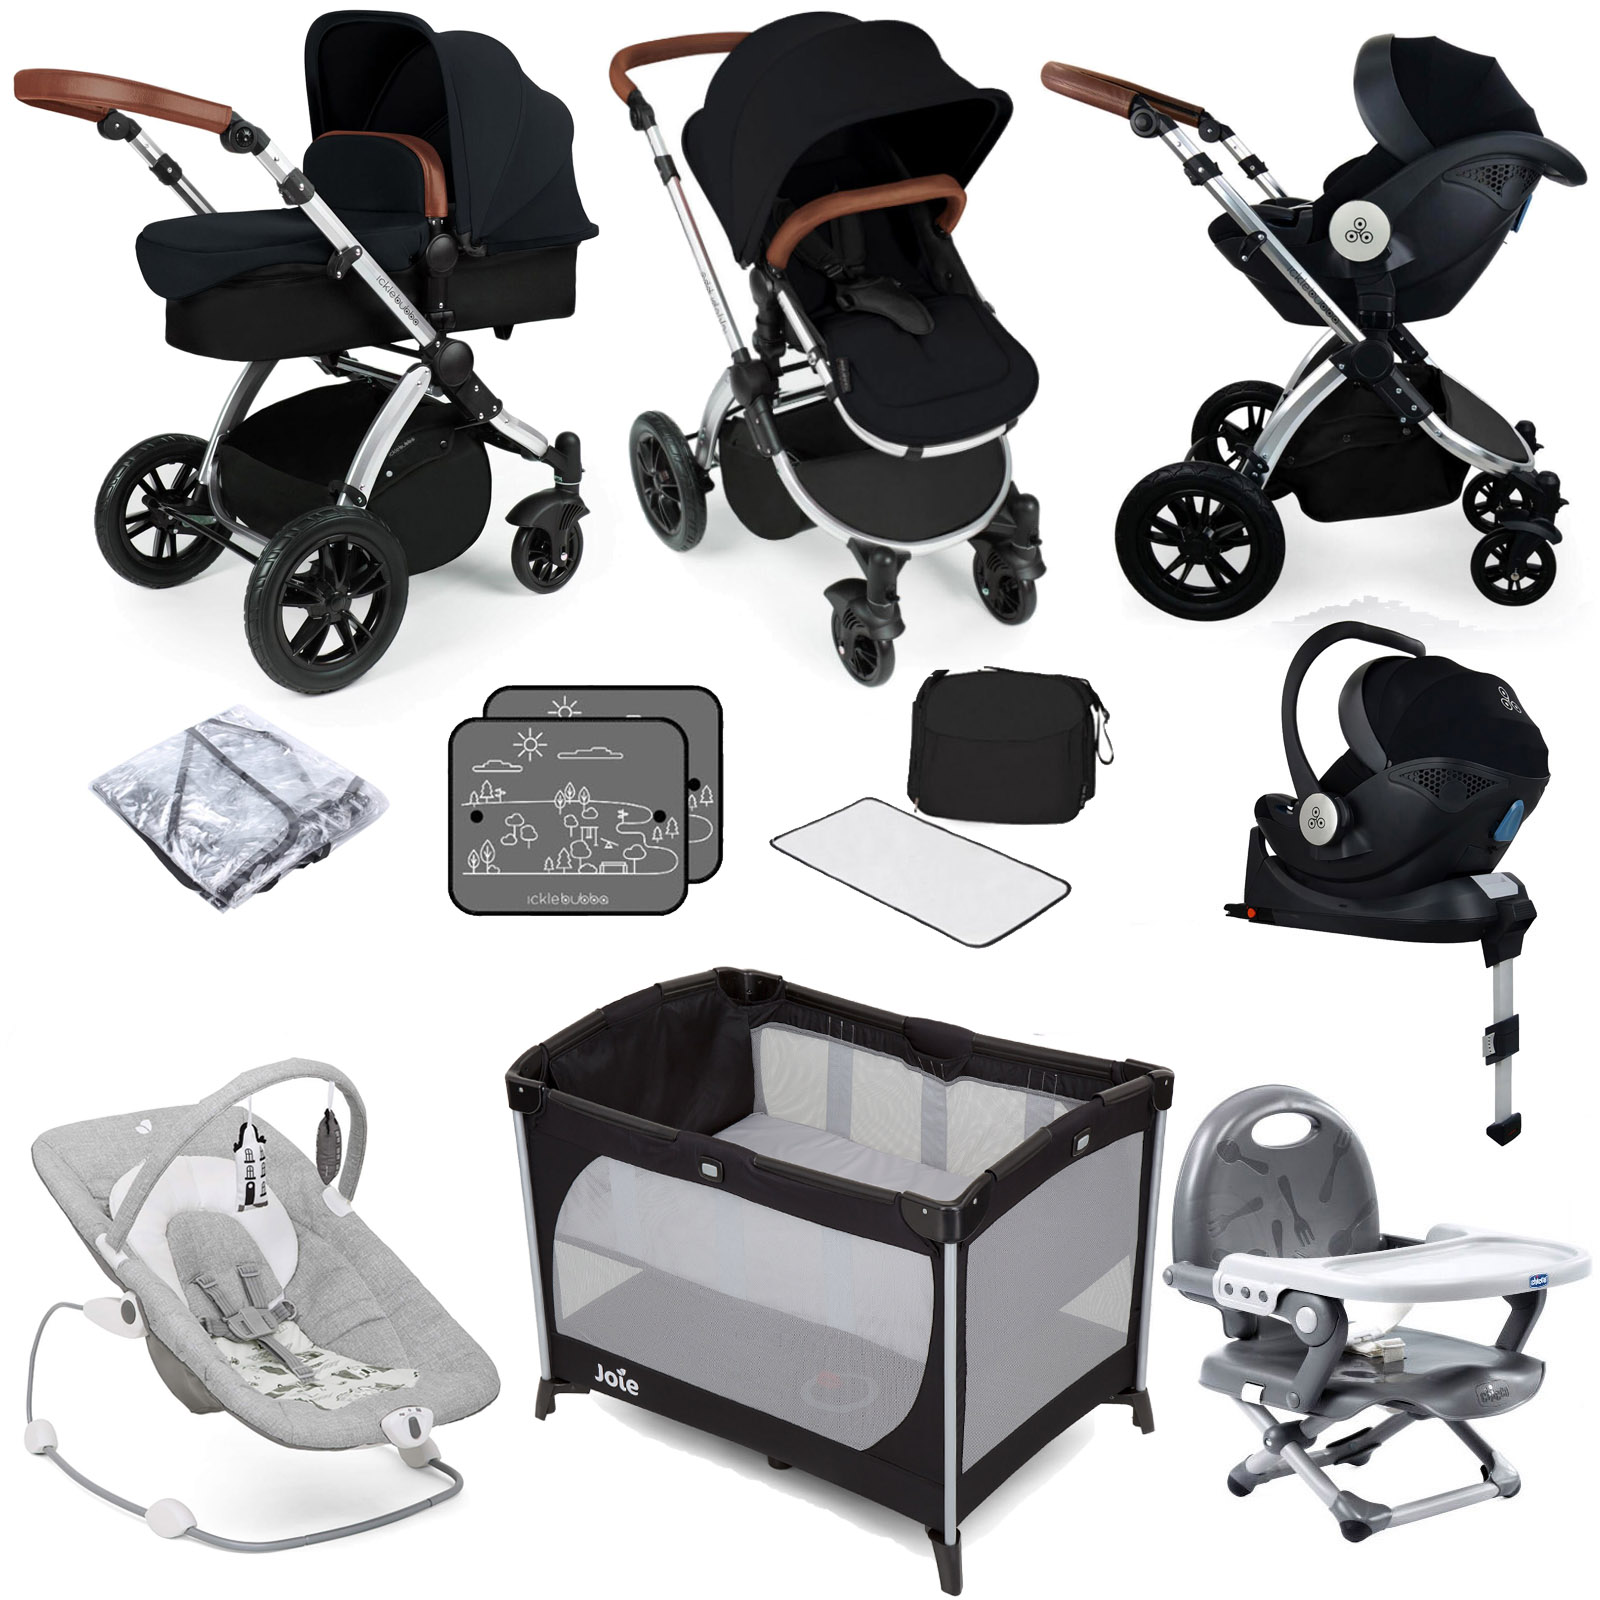 ickle bubba stomp v3 all in one travel system